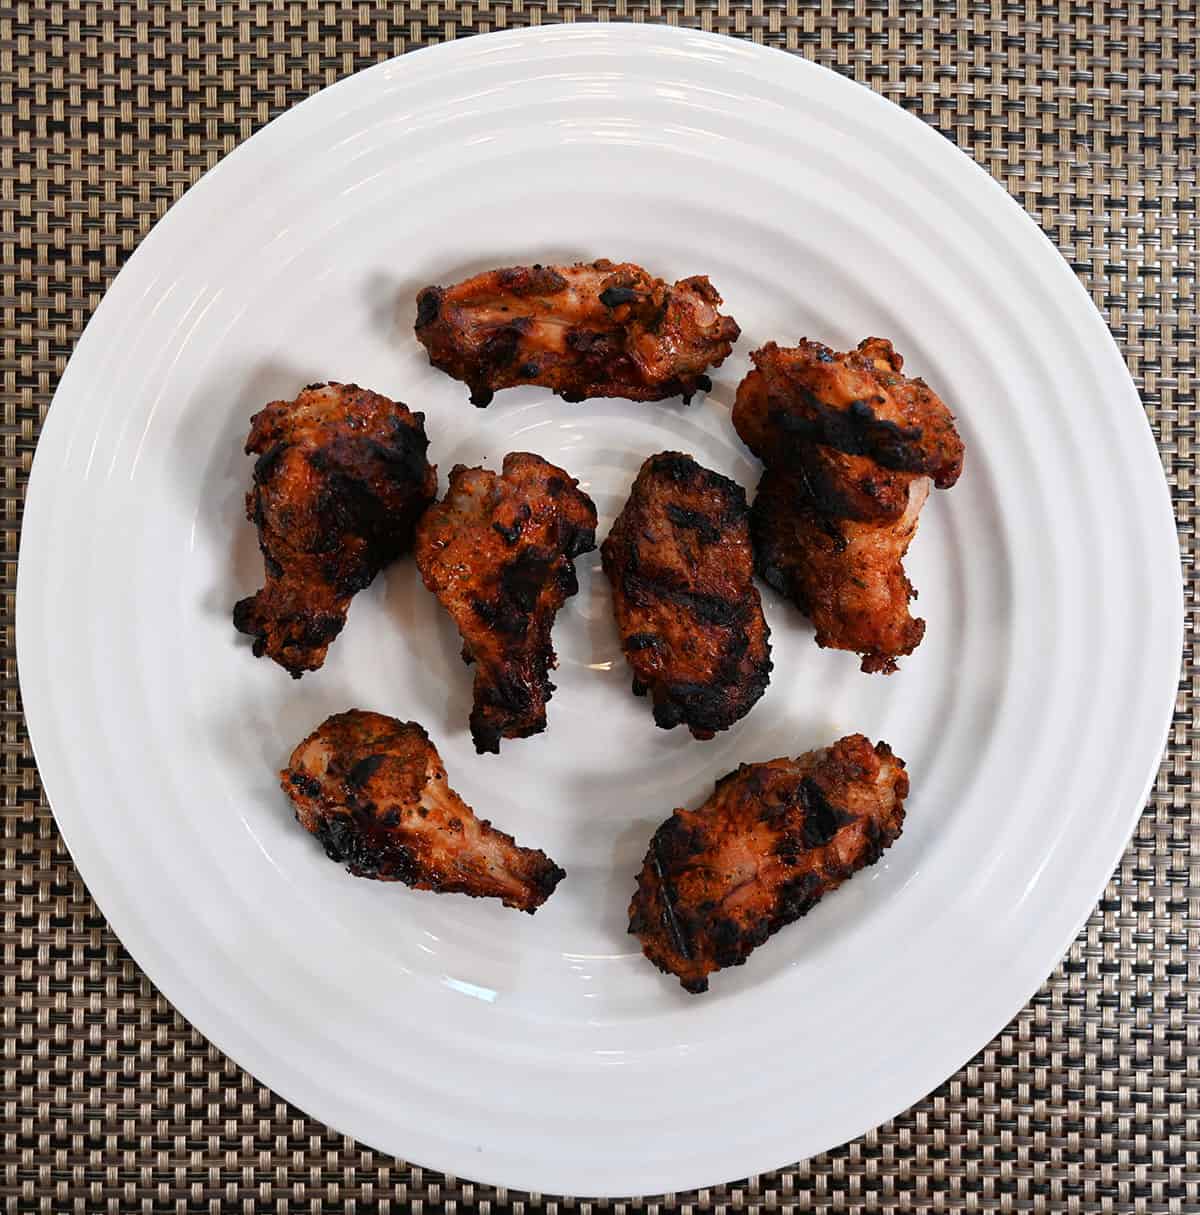 Plate of seven grilled Costco chicken wings, top down image.